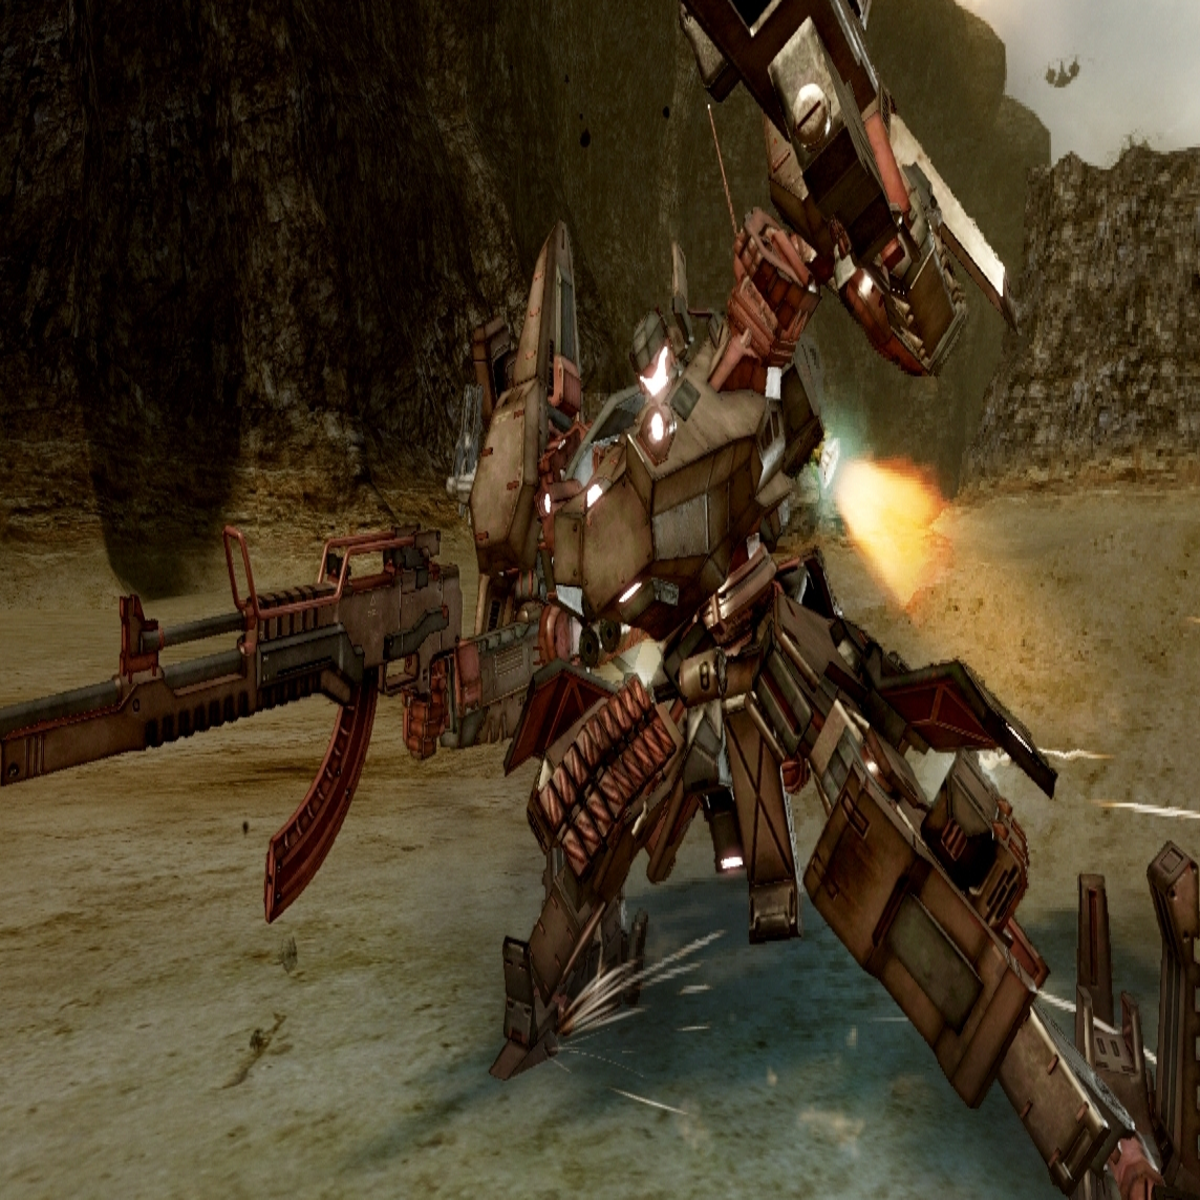 Armored Core has a new game coming, with From Software working on